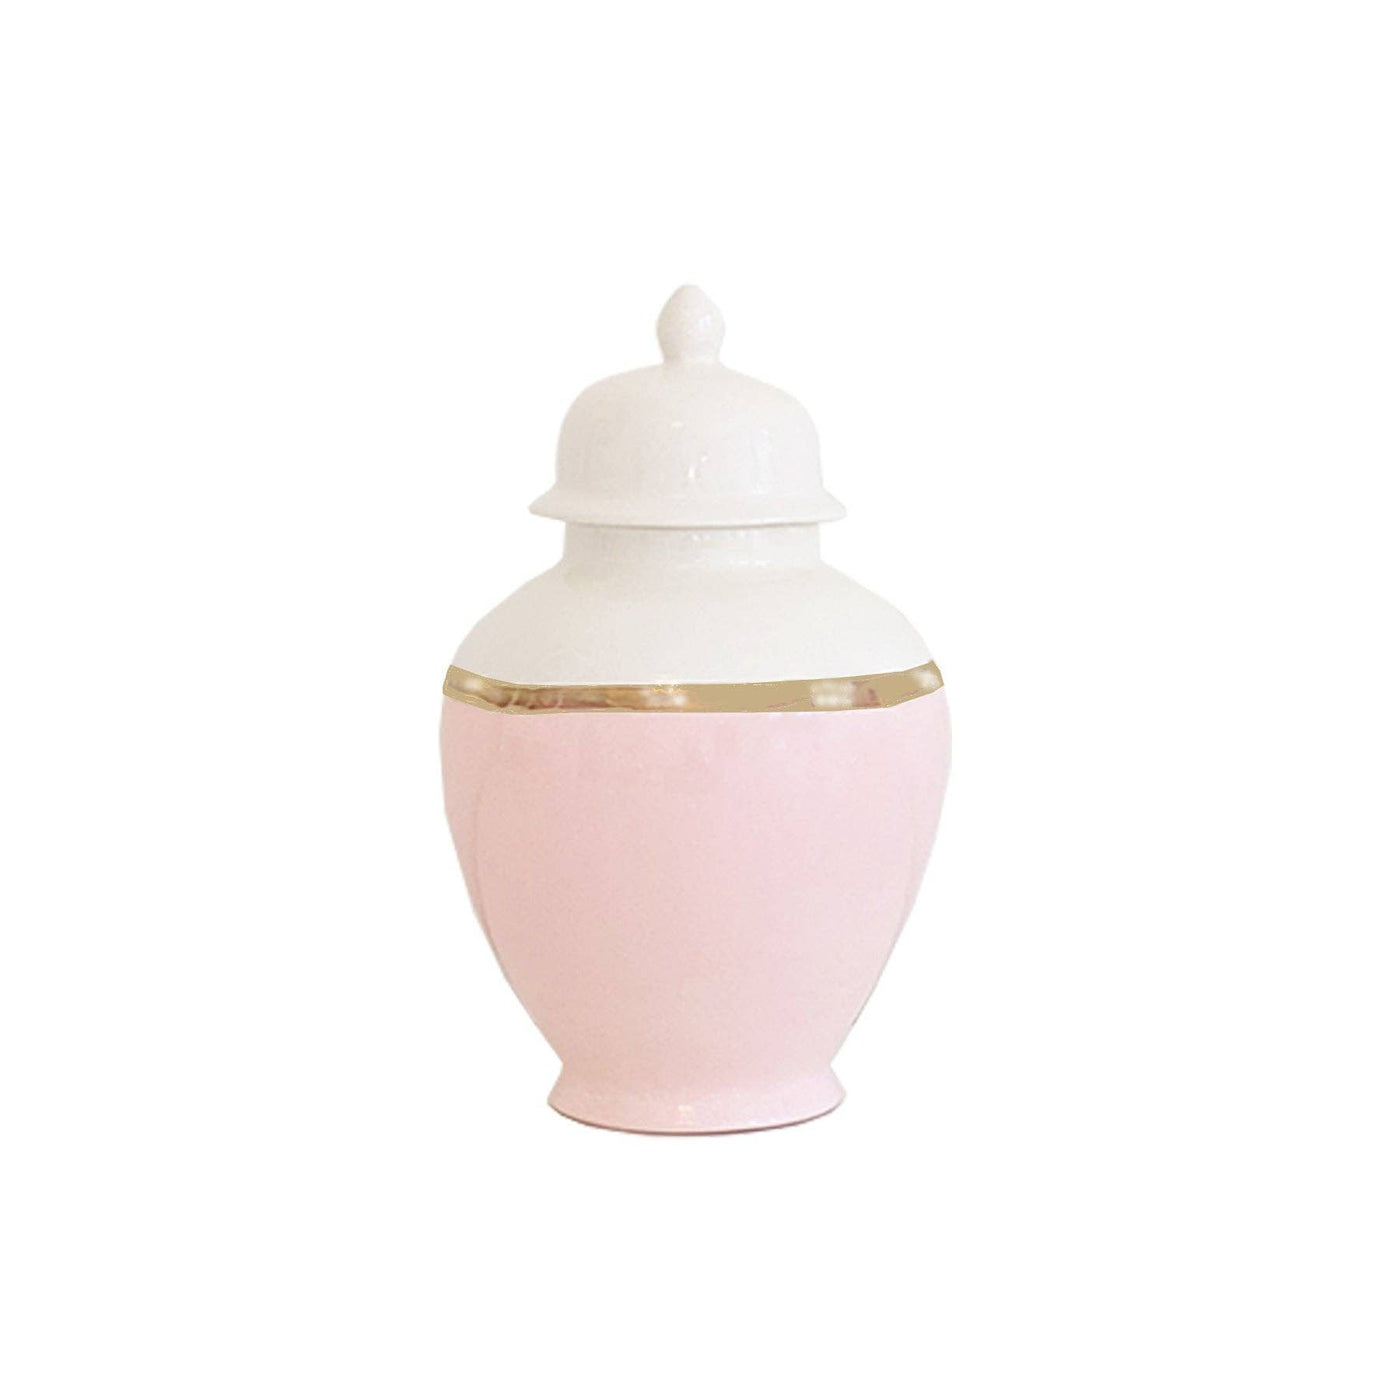 Lo Home by Lauren Haskell Designs - Cherry Blossom Pink Color Block Ginger Jar with Gold Accent